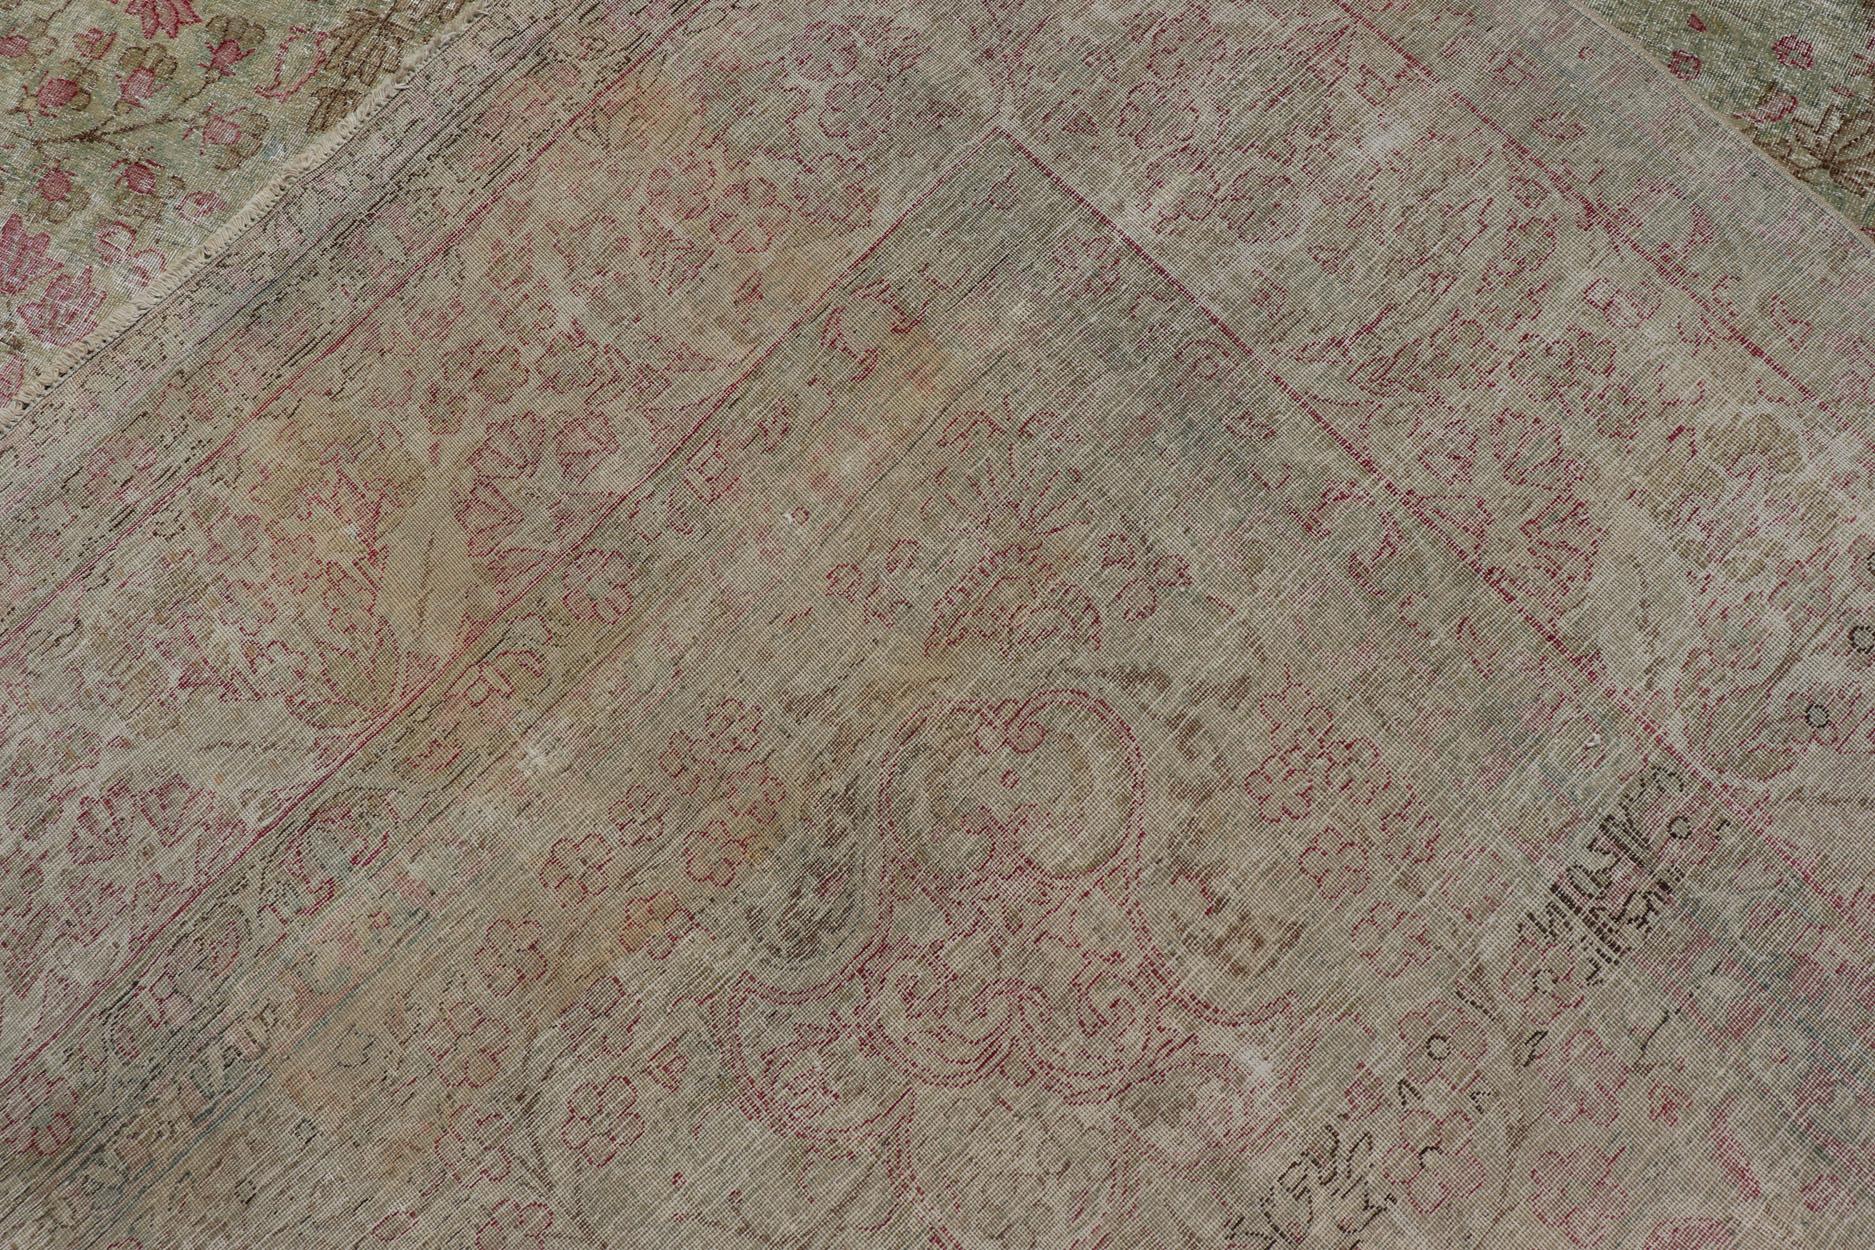 Early 20th Century Antique Persian Lavar Kerman Distressed Rug with Multicolored Floral Motifs For Sale